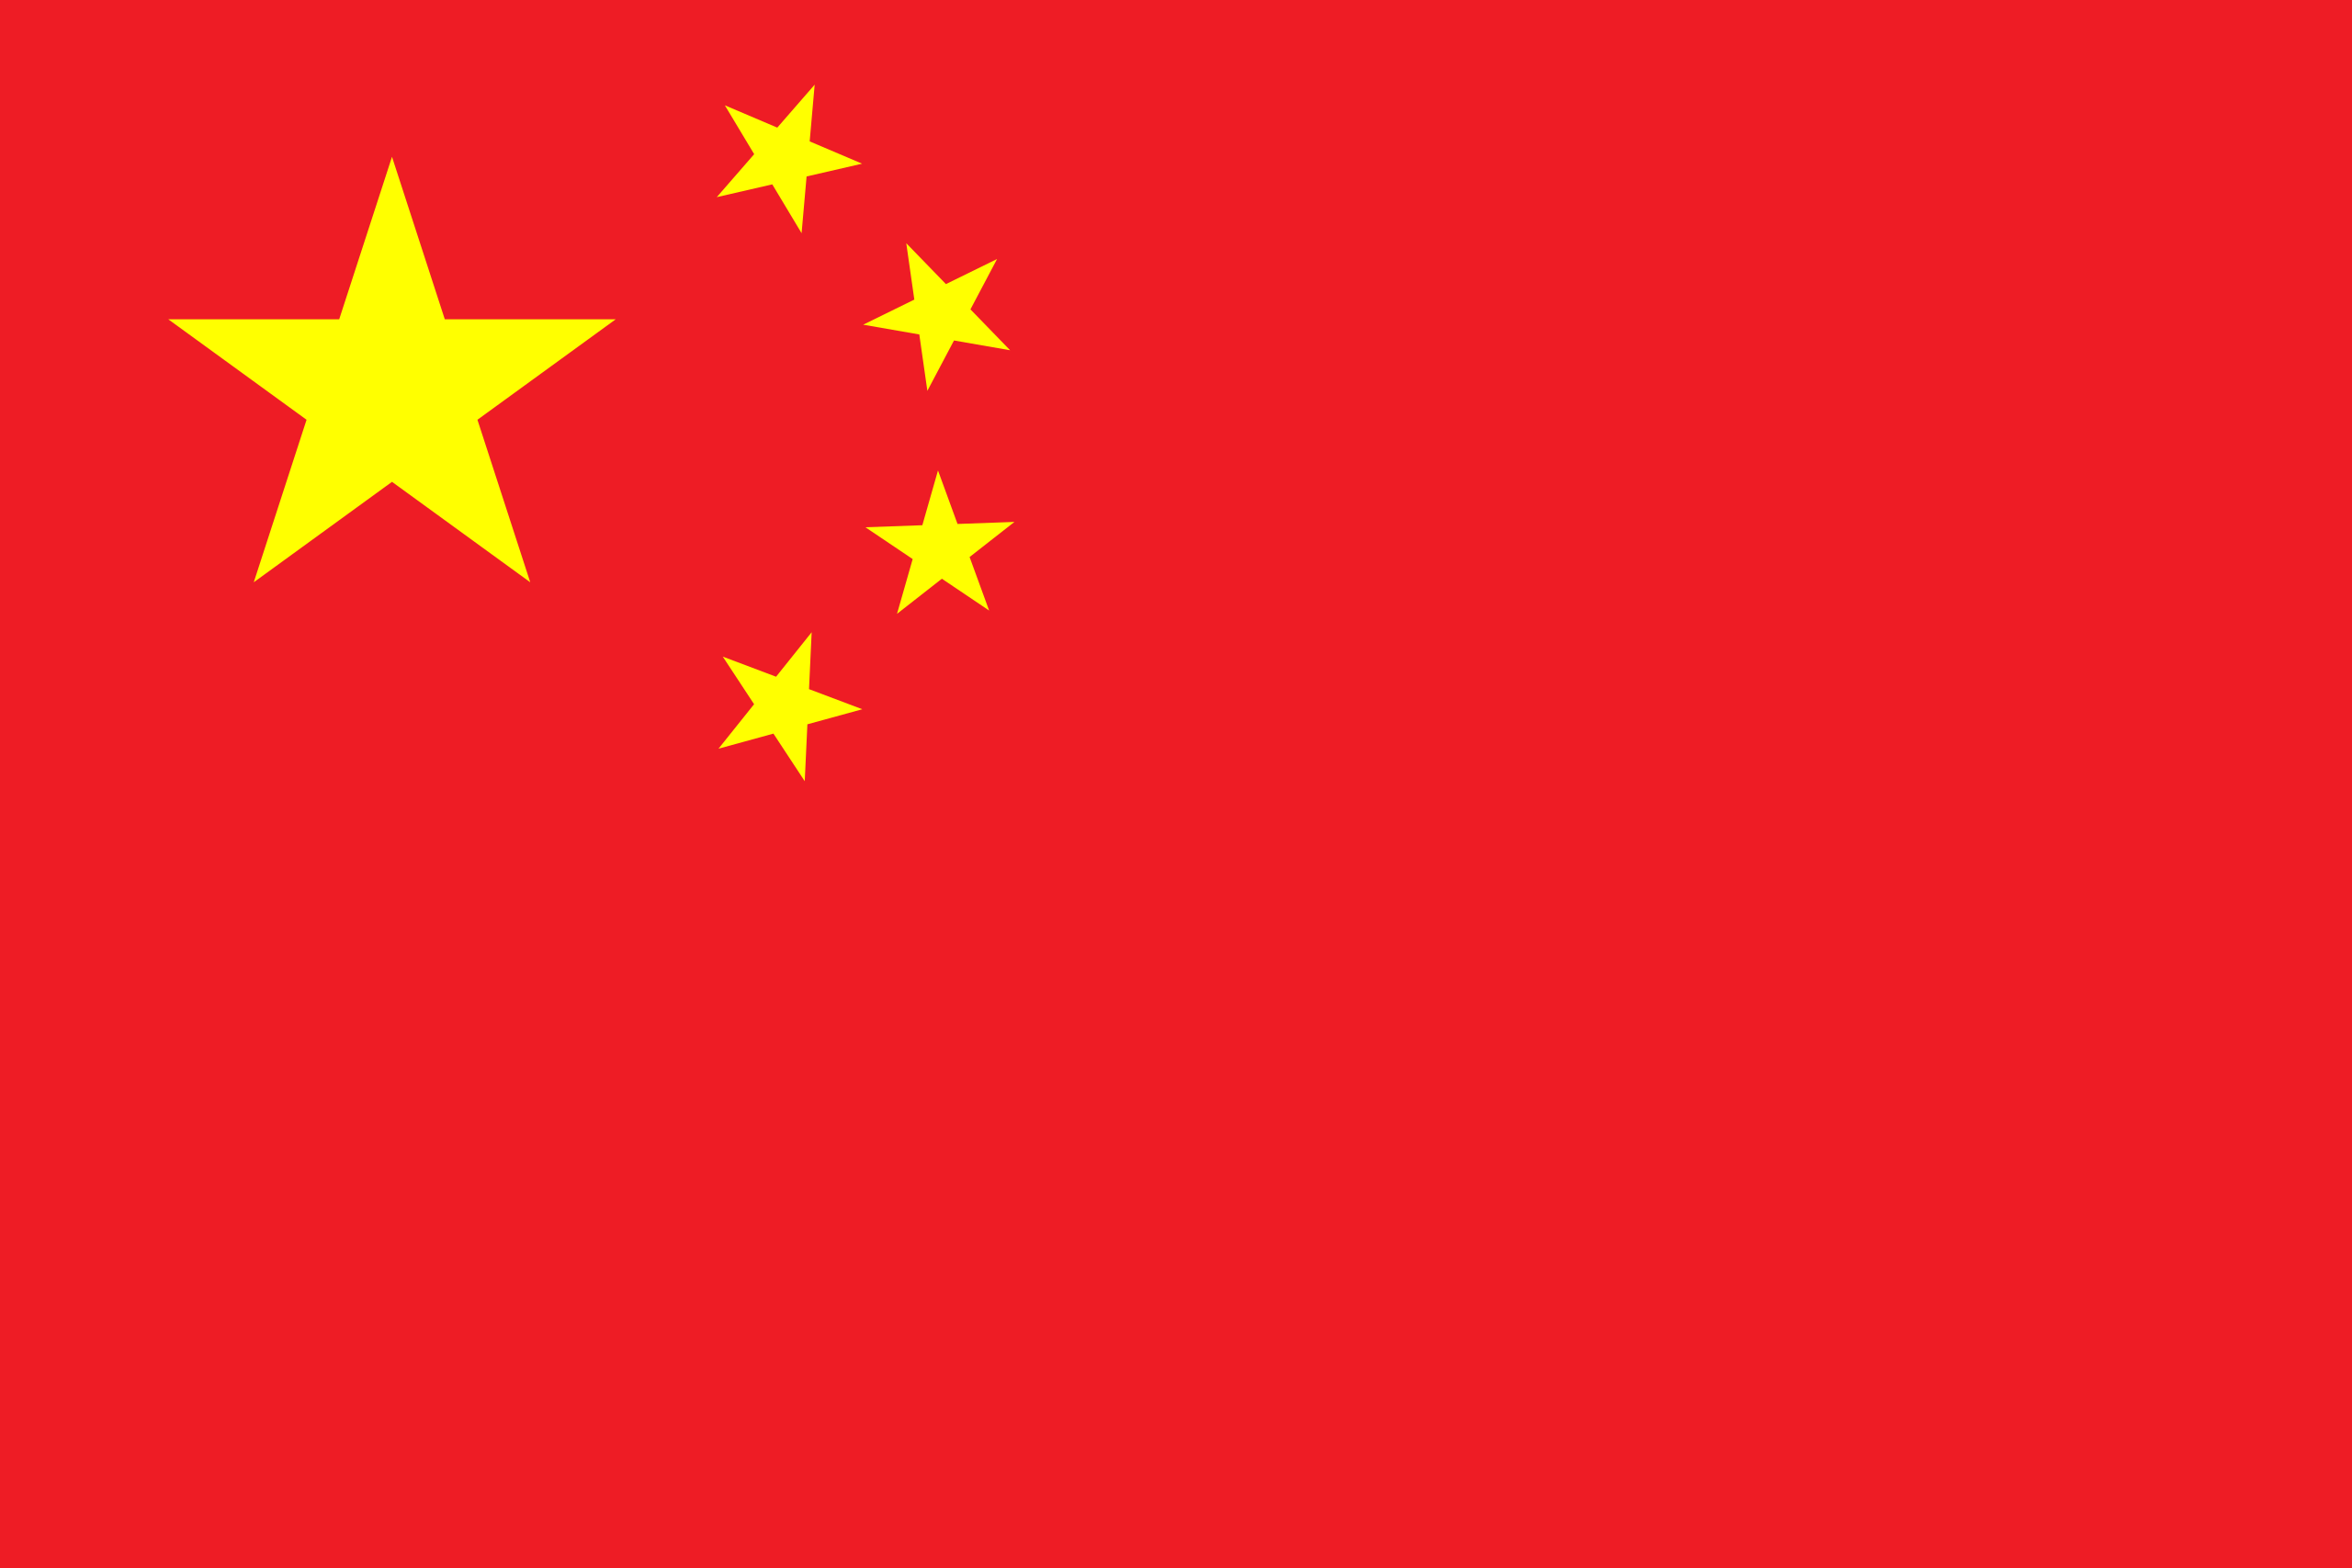 File:Flag of the People's Republic of China.svg - Wikimedia Commons